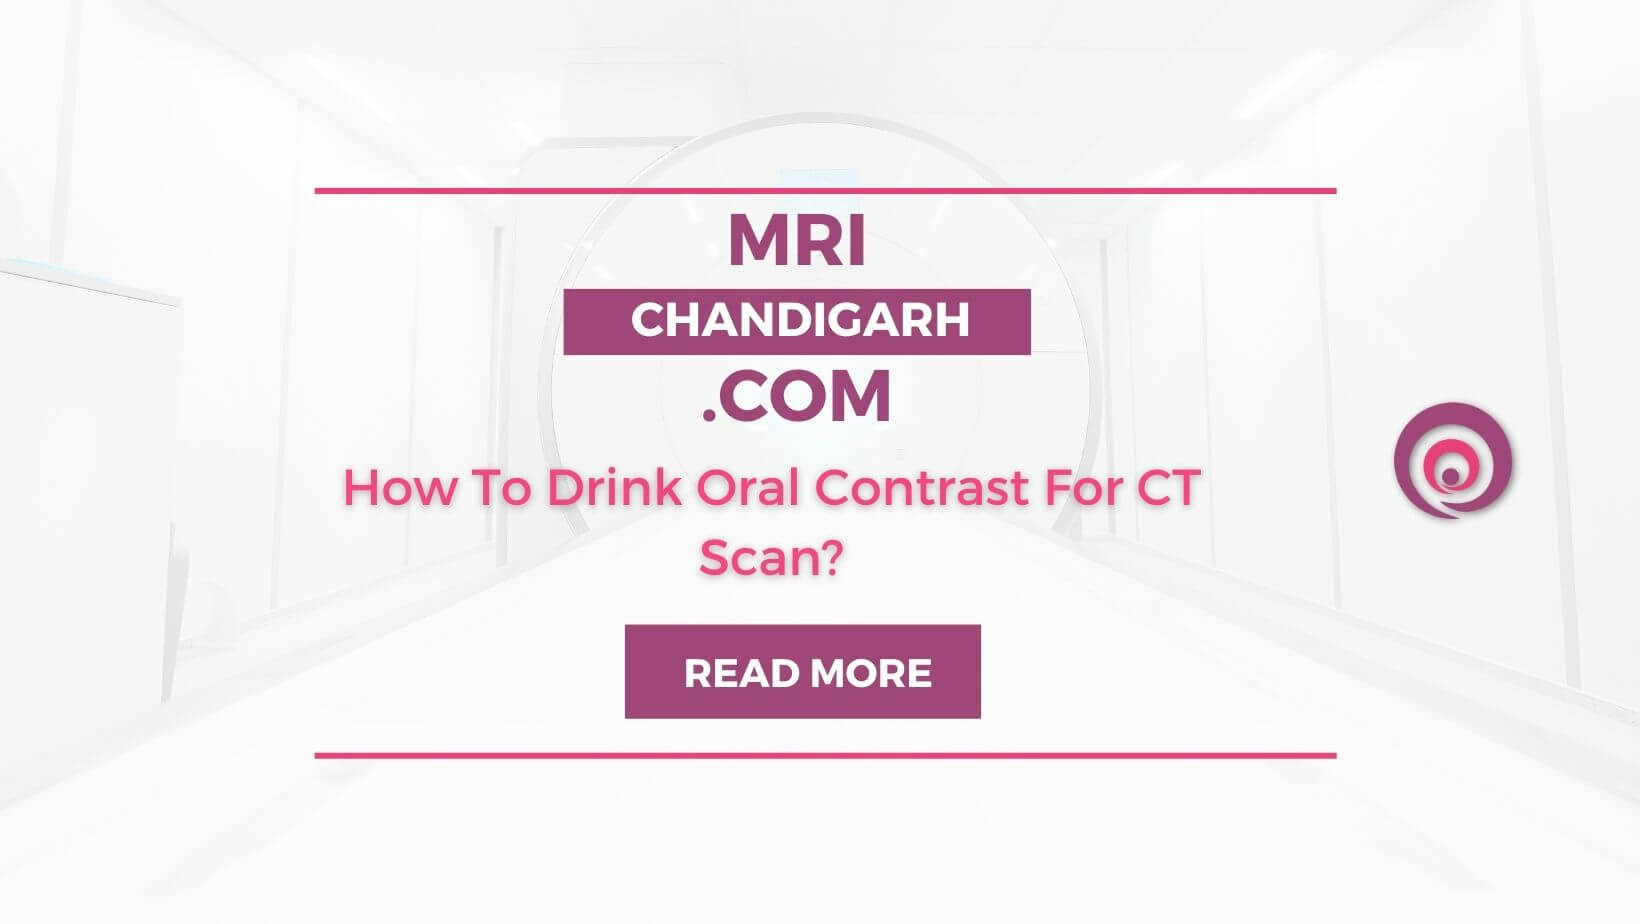 How To Drink Oral Contrast For CT Scan?